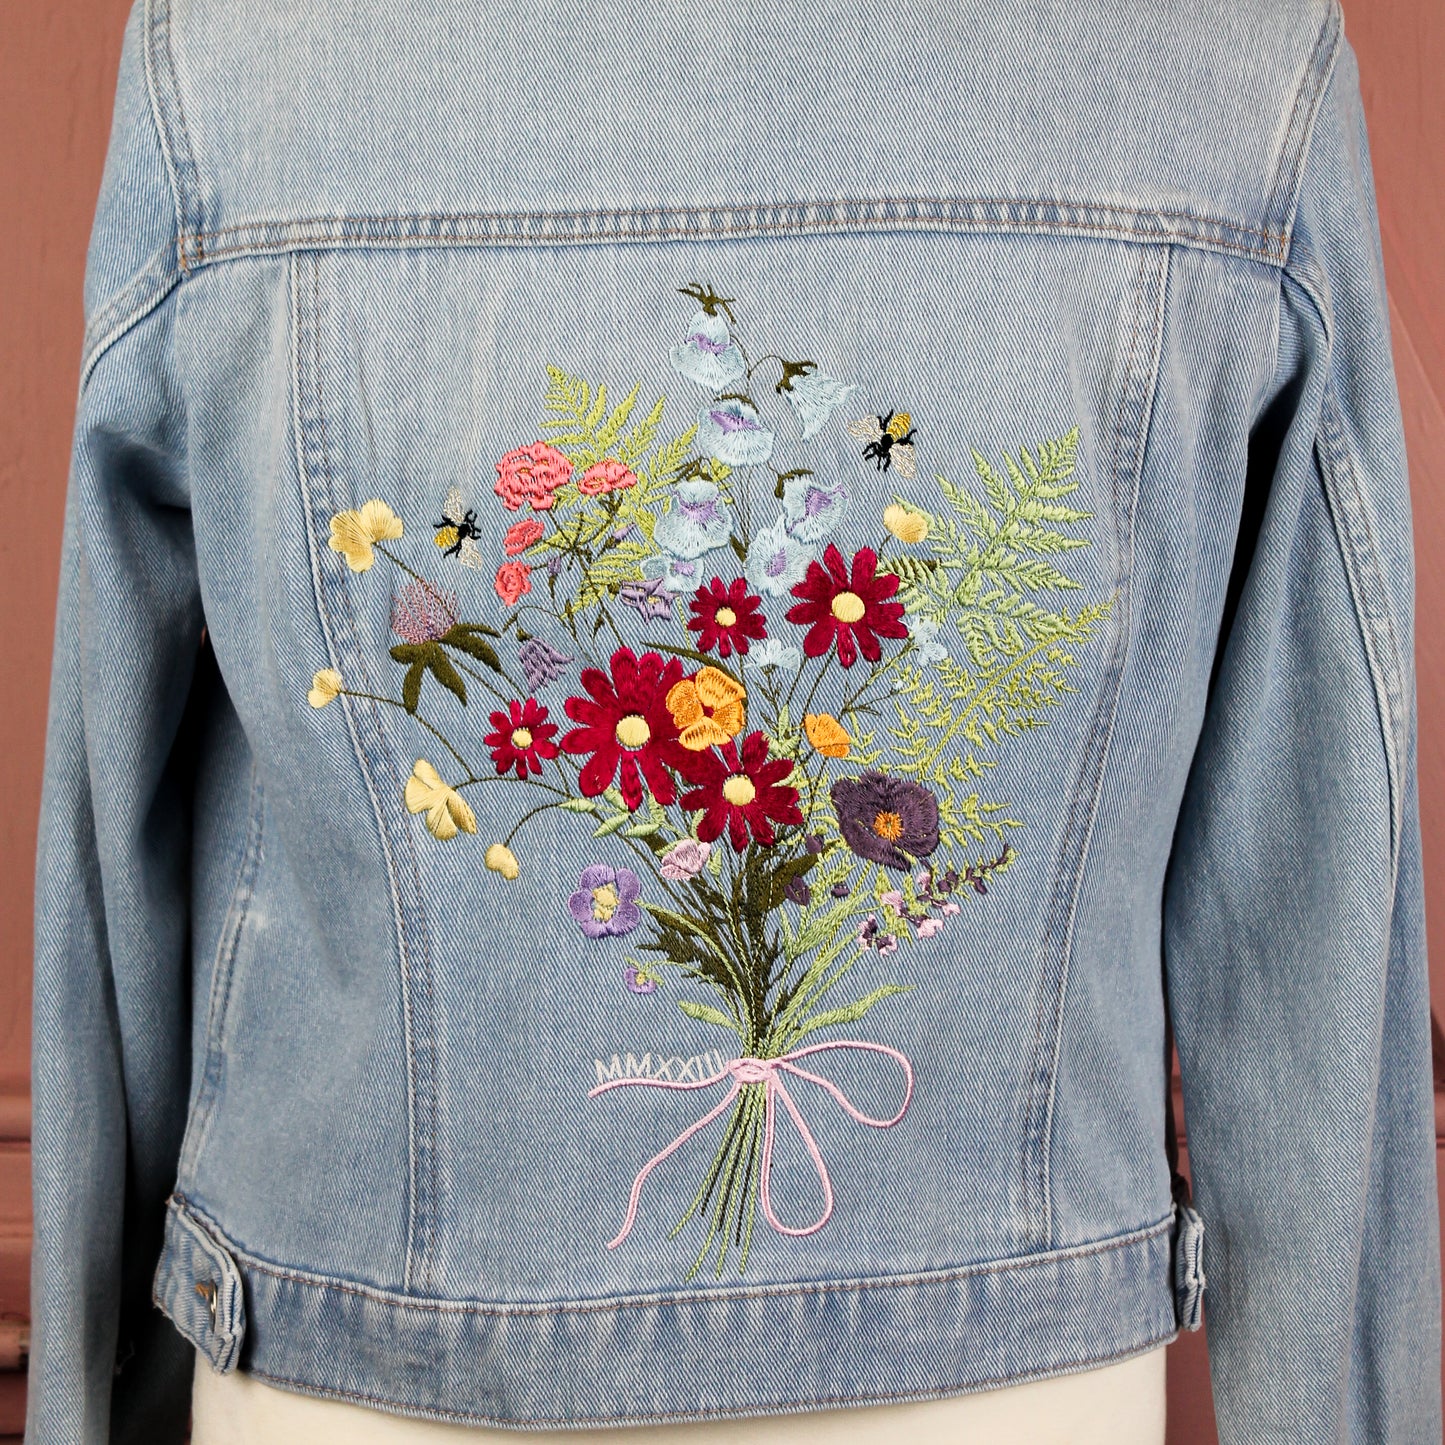 Floral Delight Denim Bridal Cover Up: Infuse your wedding ensemble with the beauty of nature through this denim jacket, adorned with a lovely flower bouquet embroidery in ecru